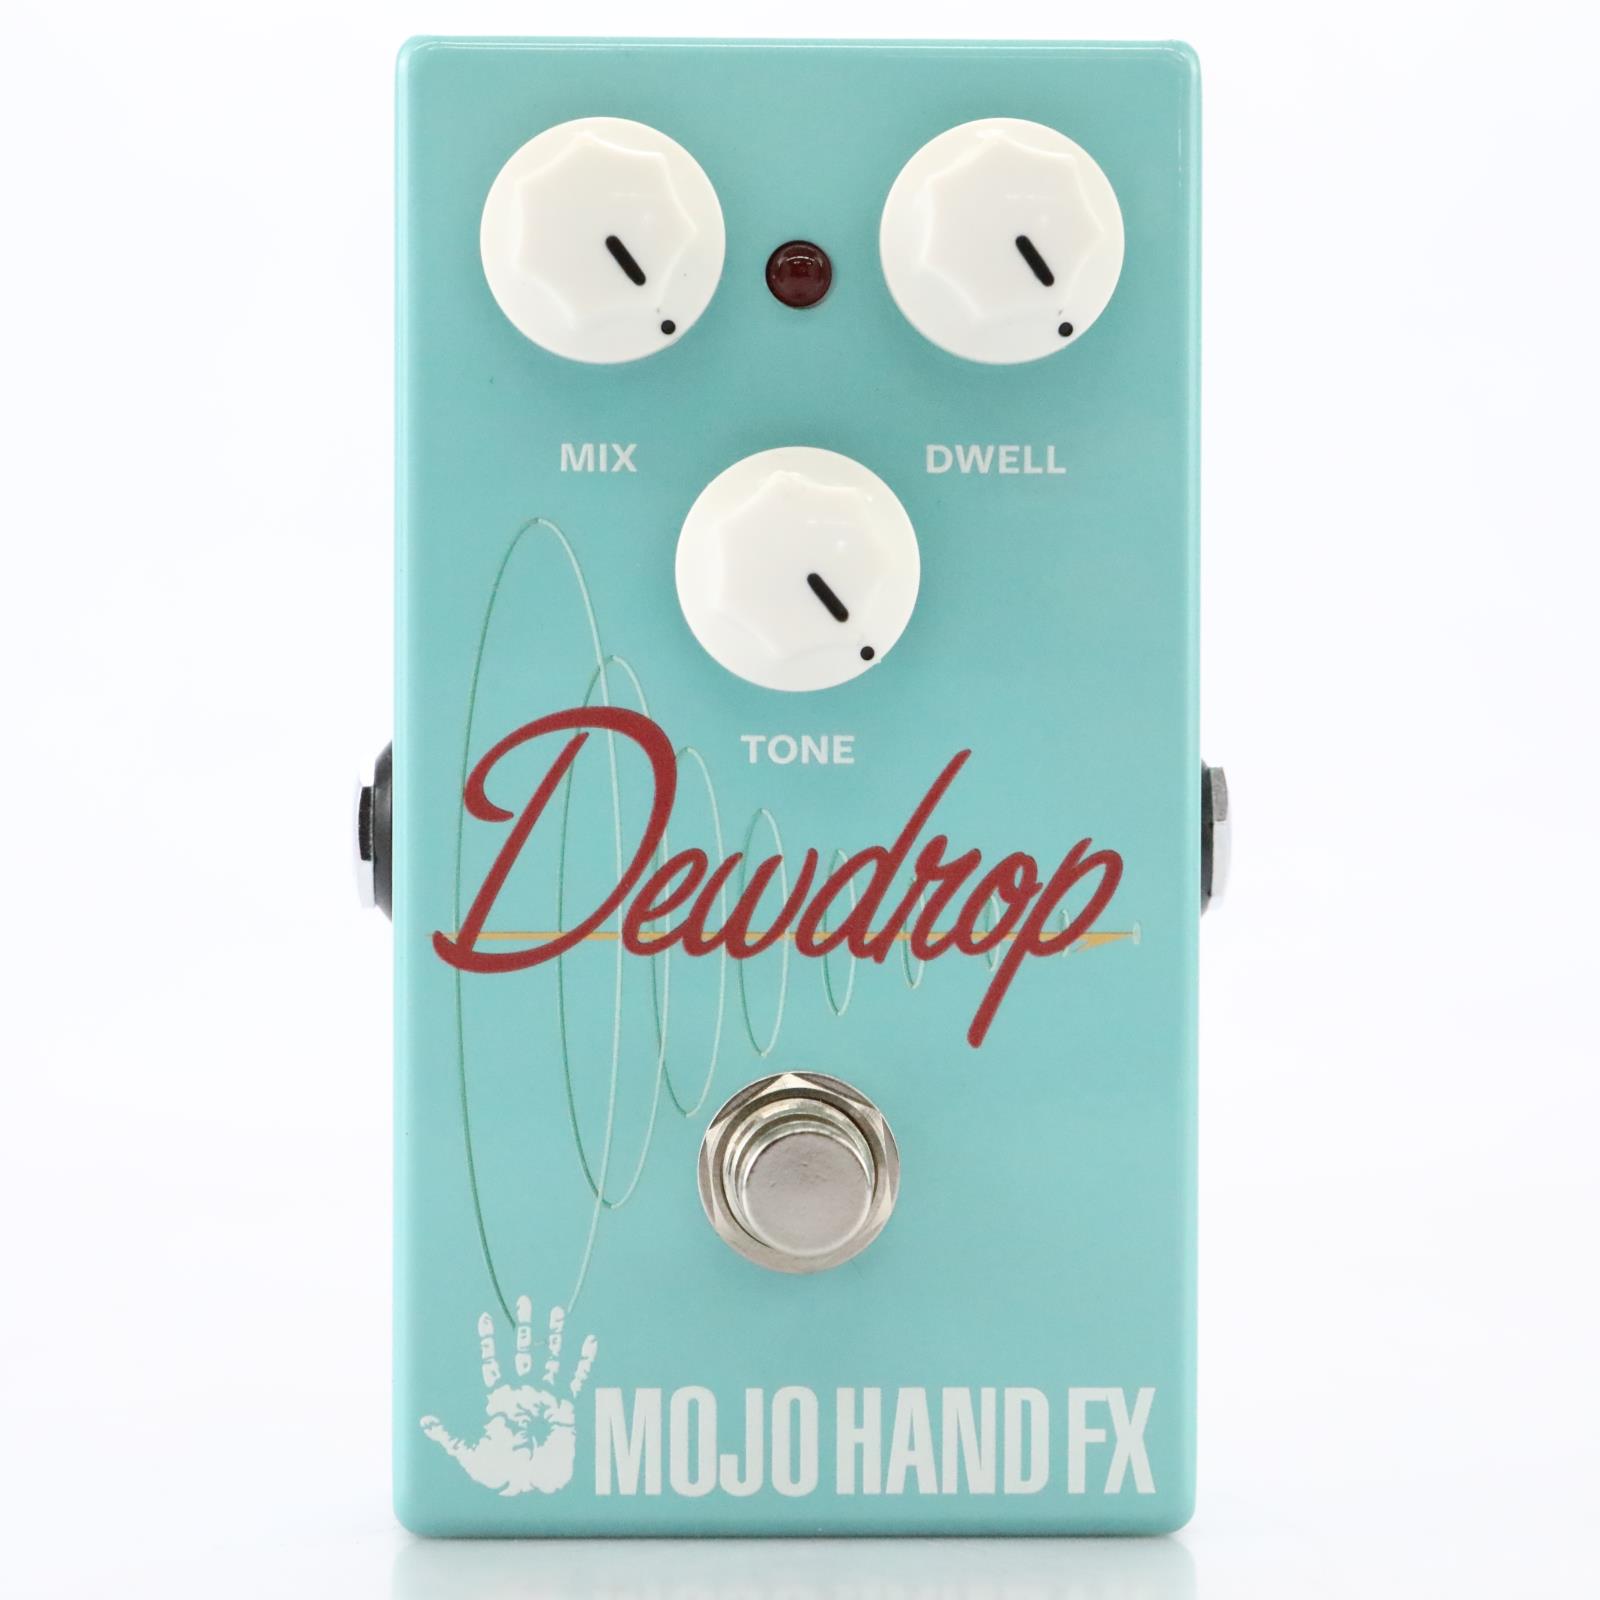 Mojo Hand FX Dewdrop Reverb Guitar Effect Pedal Stompbox #48521